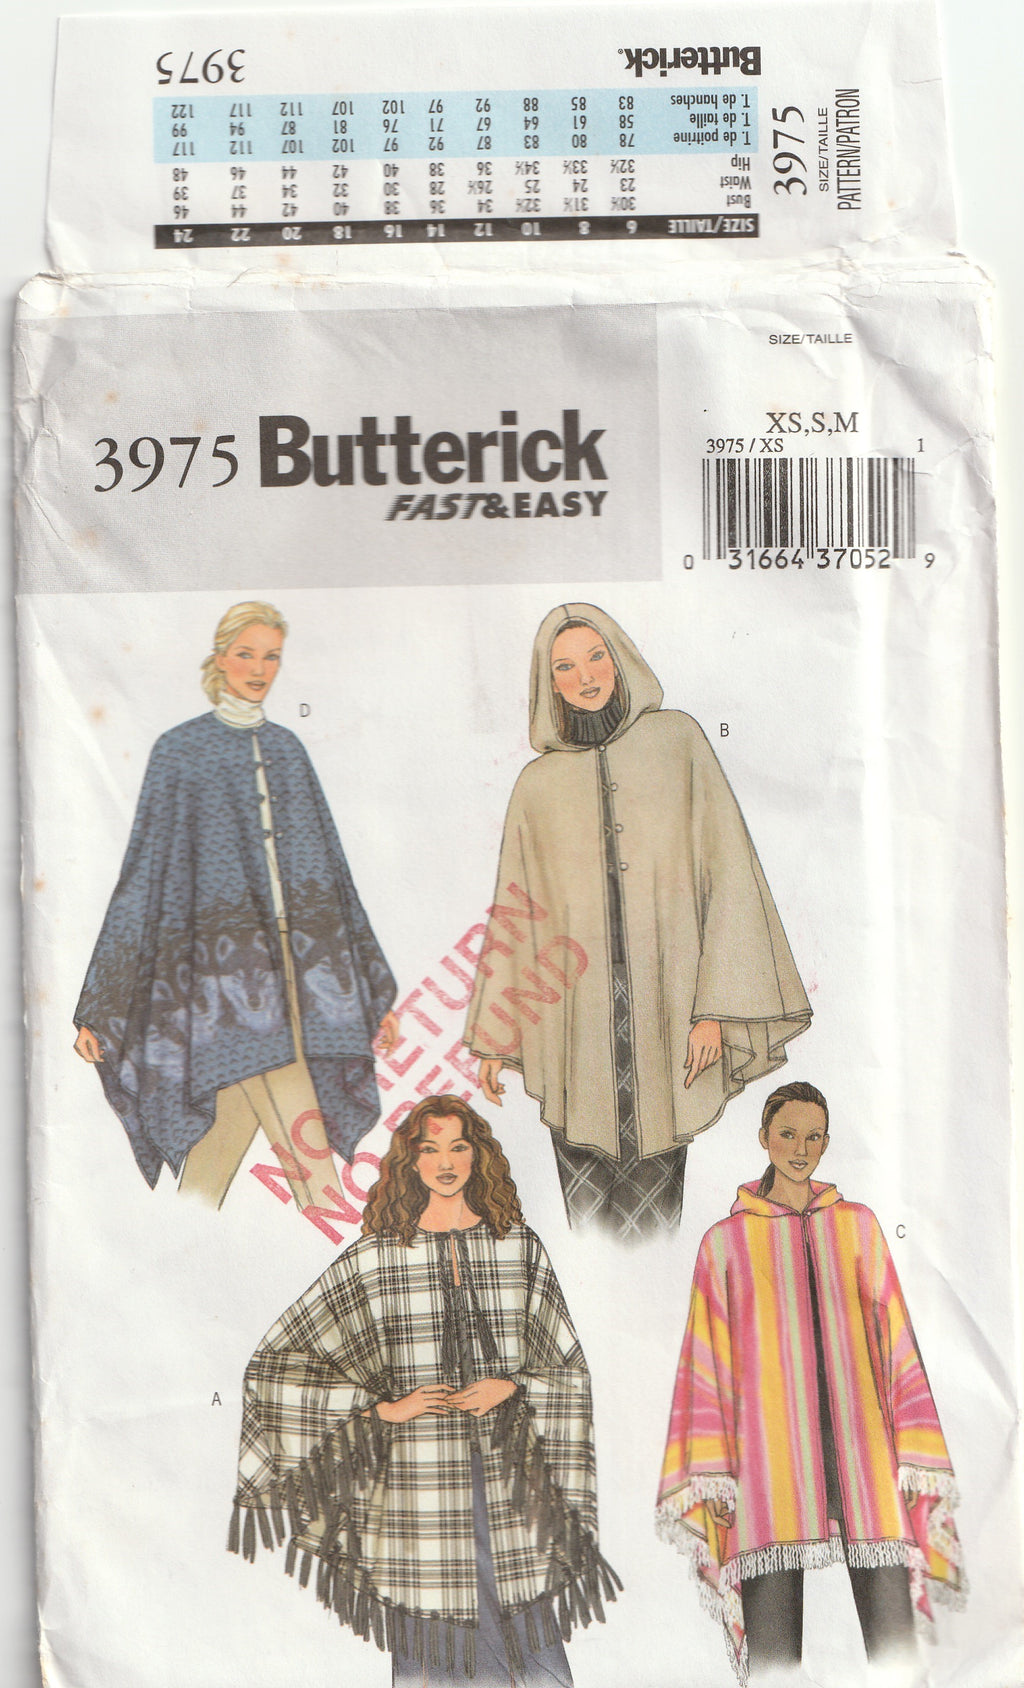 2003 vintage sewing pattern poncho with or without hood butterick 3975